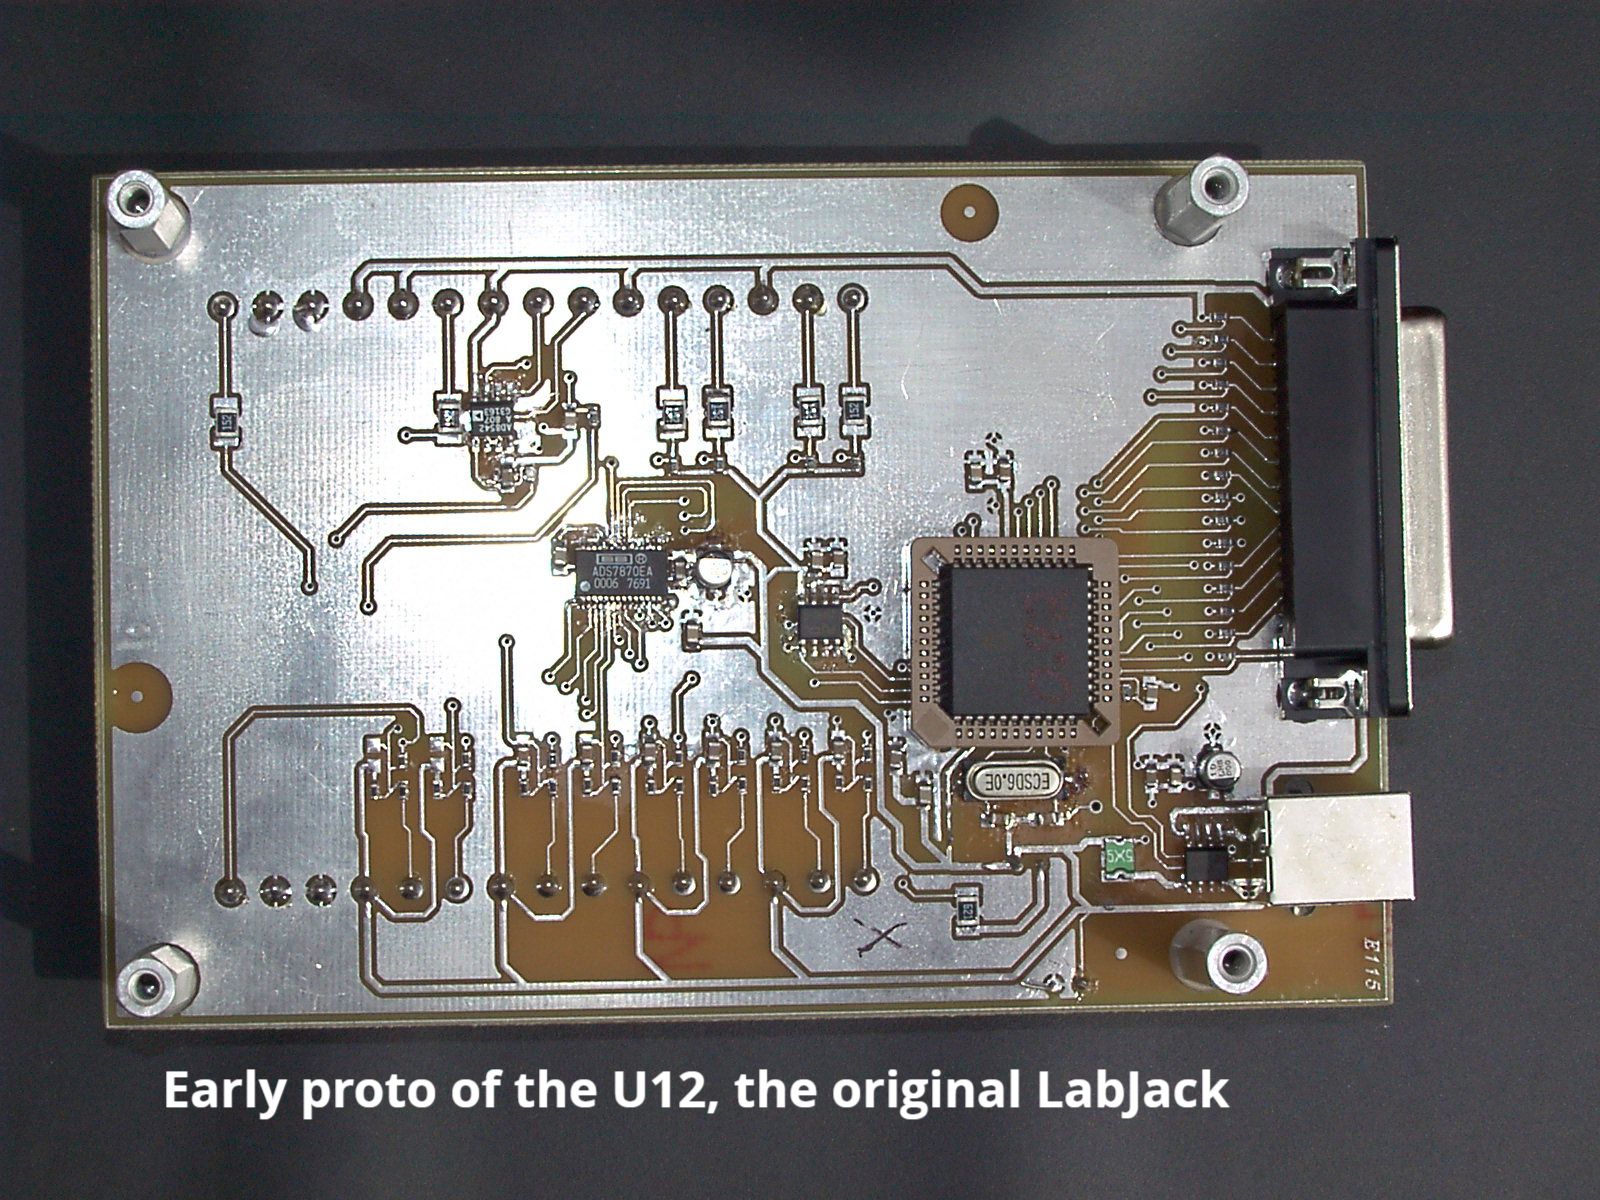 An early prototype of the U12, the original LabJack